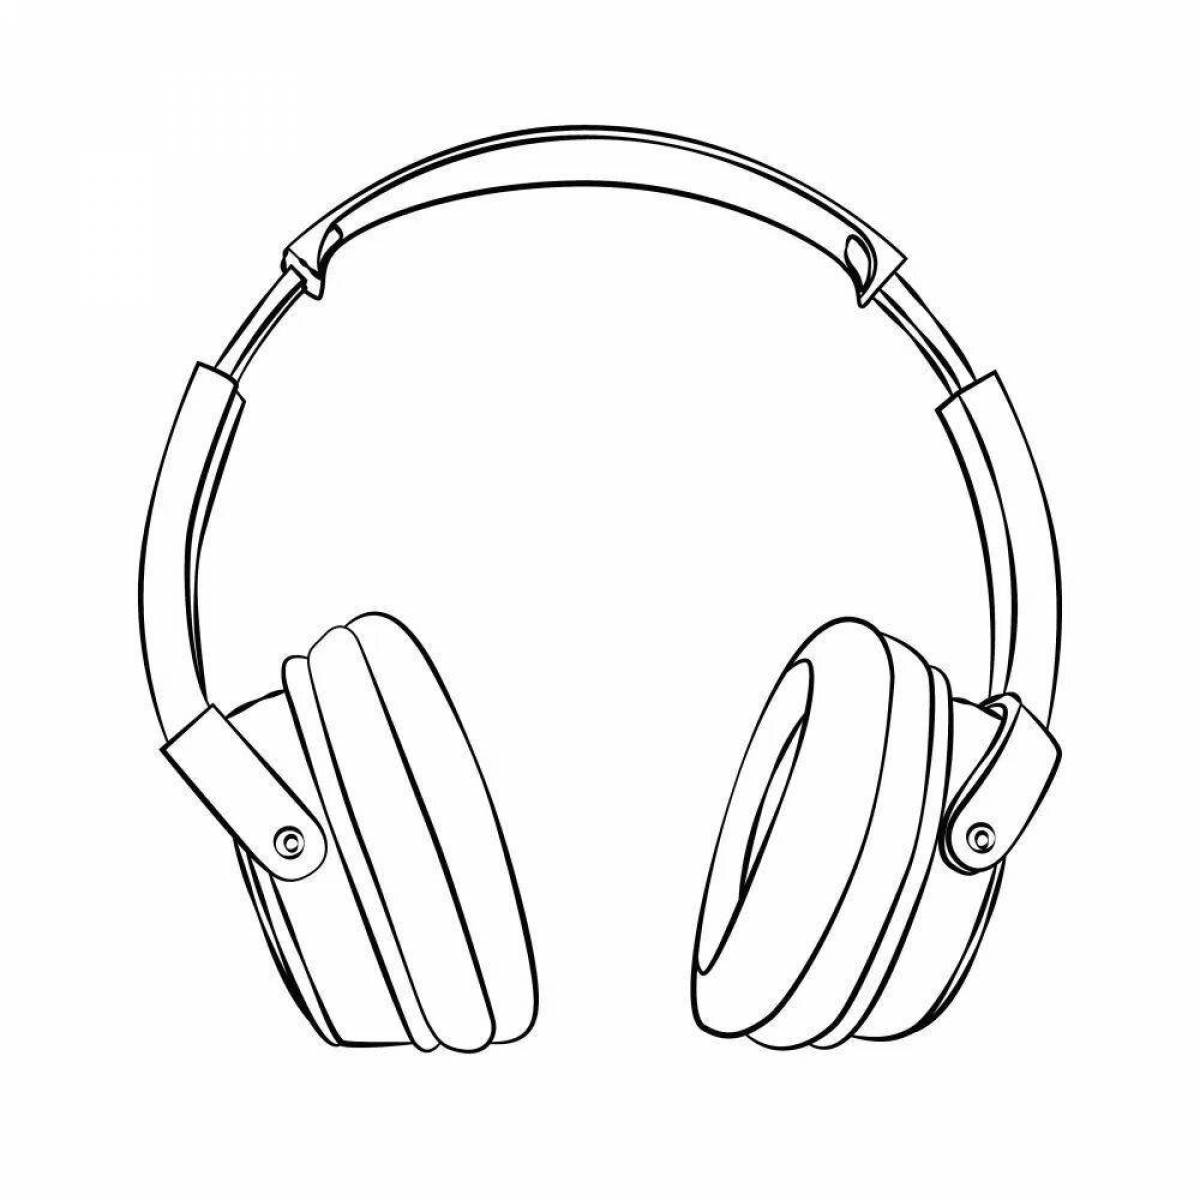 Coloring pages with headphones for kids